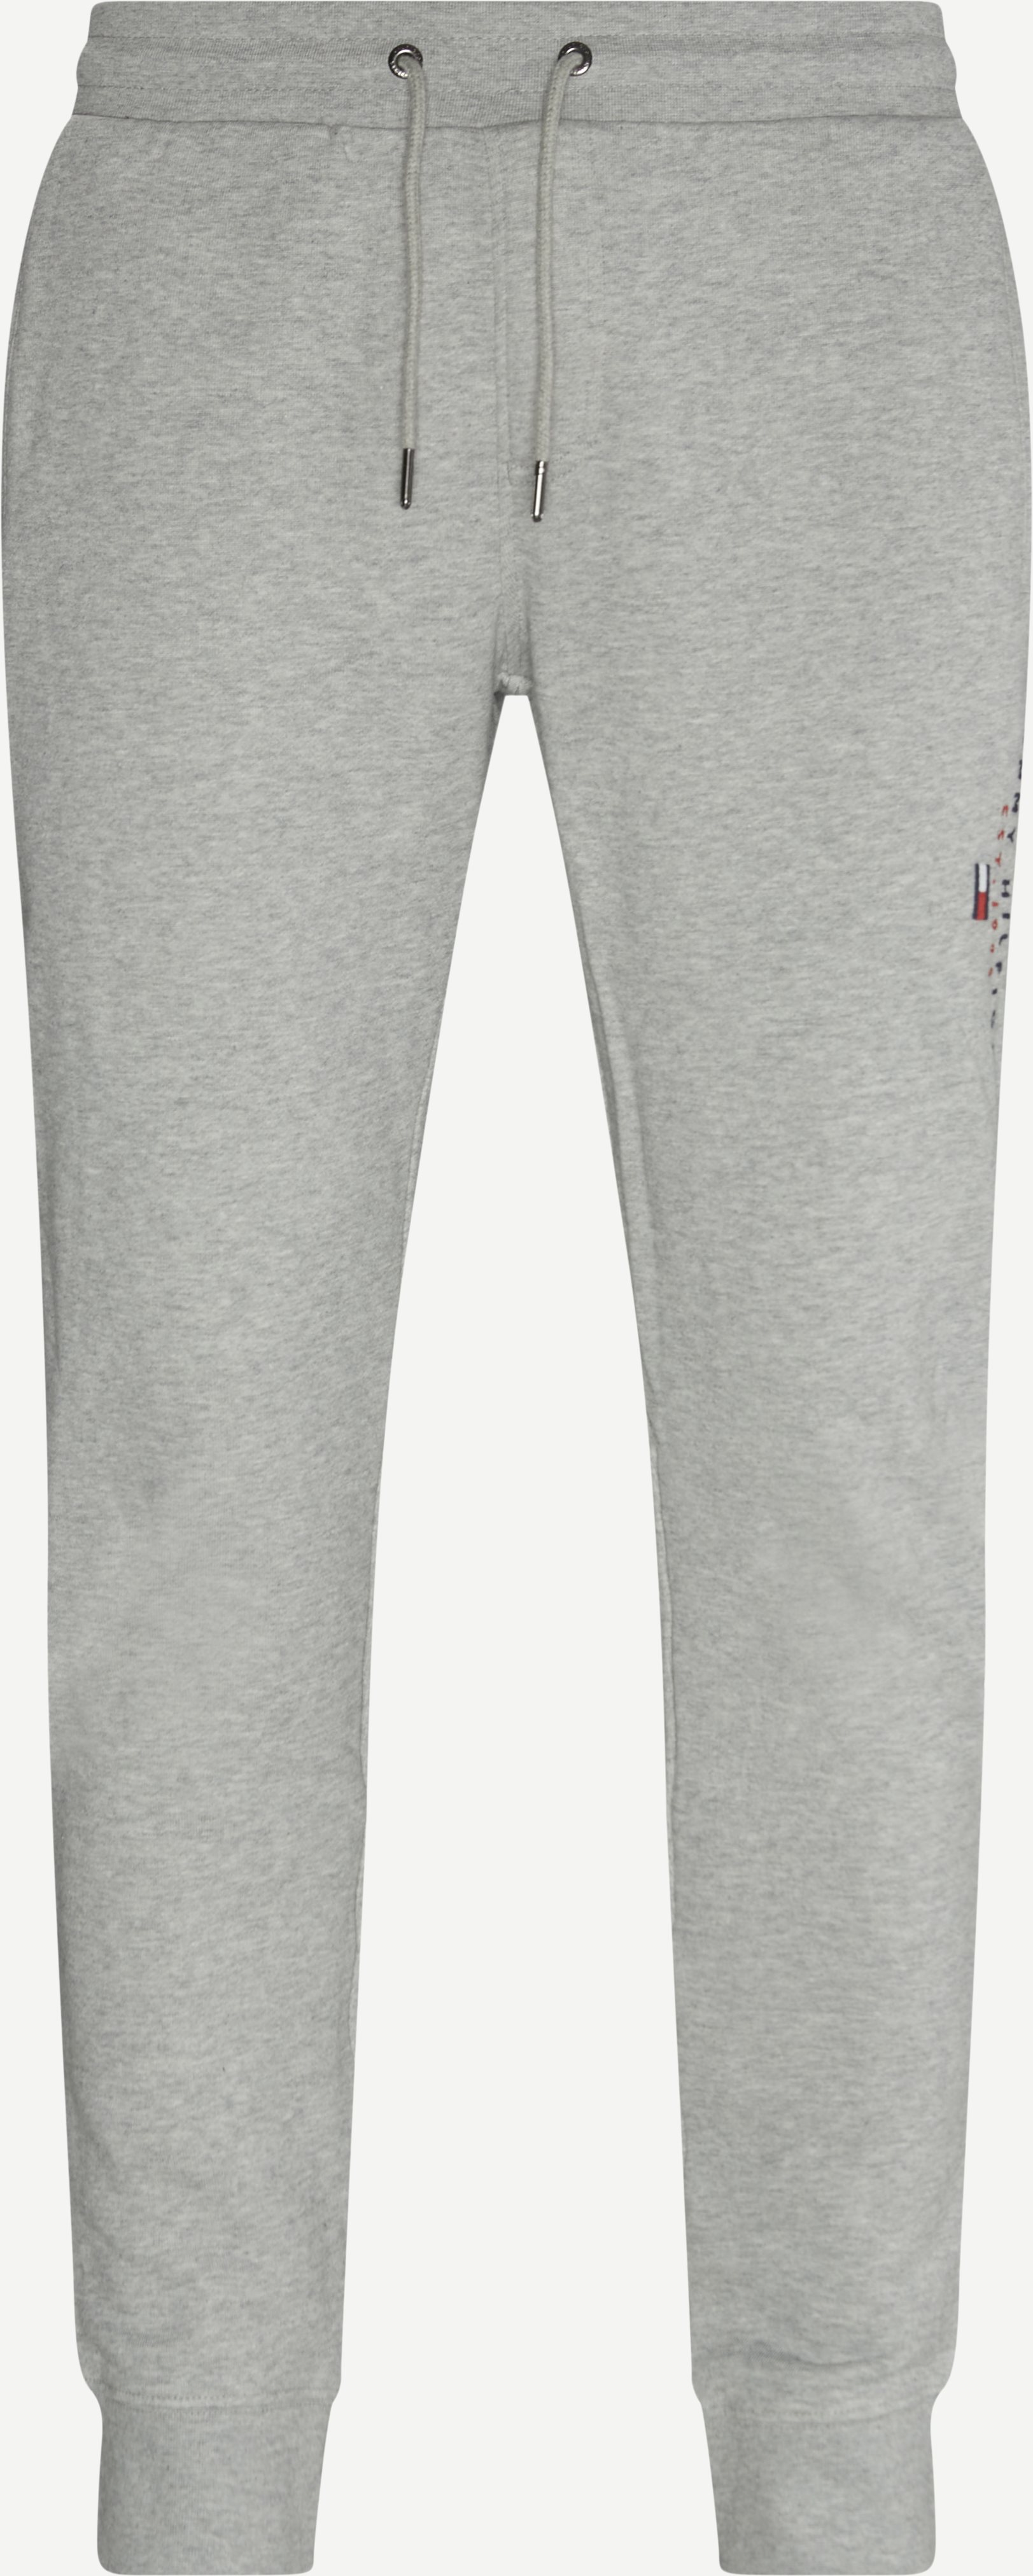 Tommy Hilfiger Sweatpant - Trousers - Regular fit - Grey